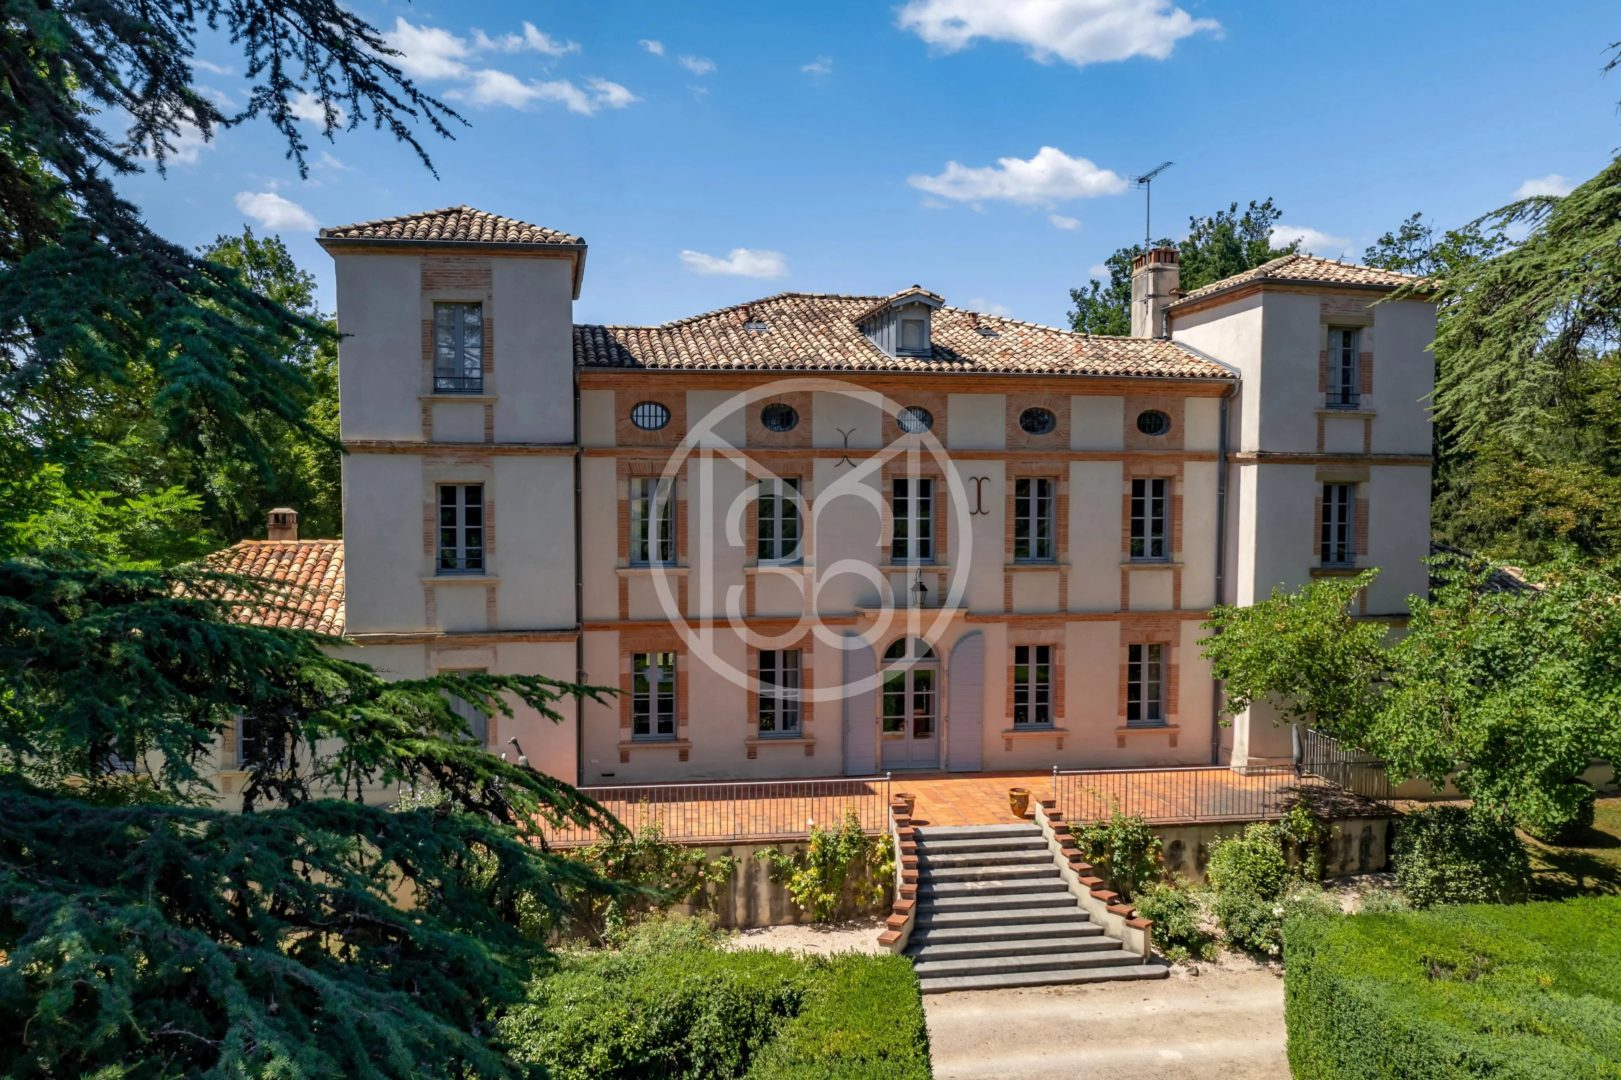 19TH CENTURY CHATEAU – OUTBUILDINGS & POOL - 8529TS